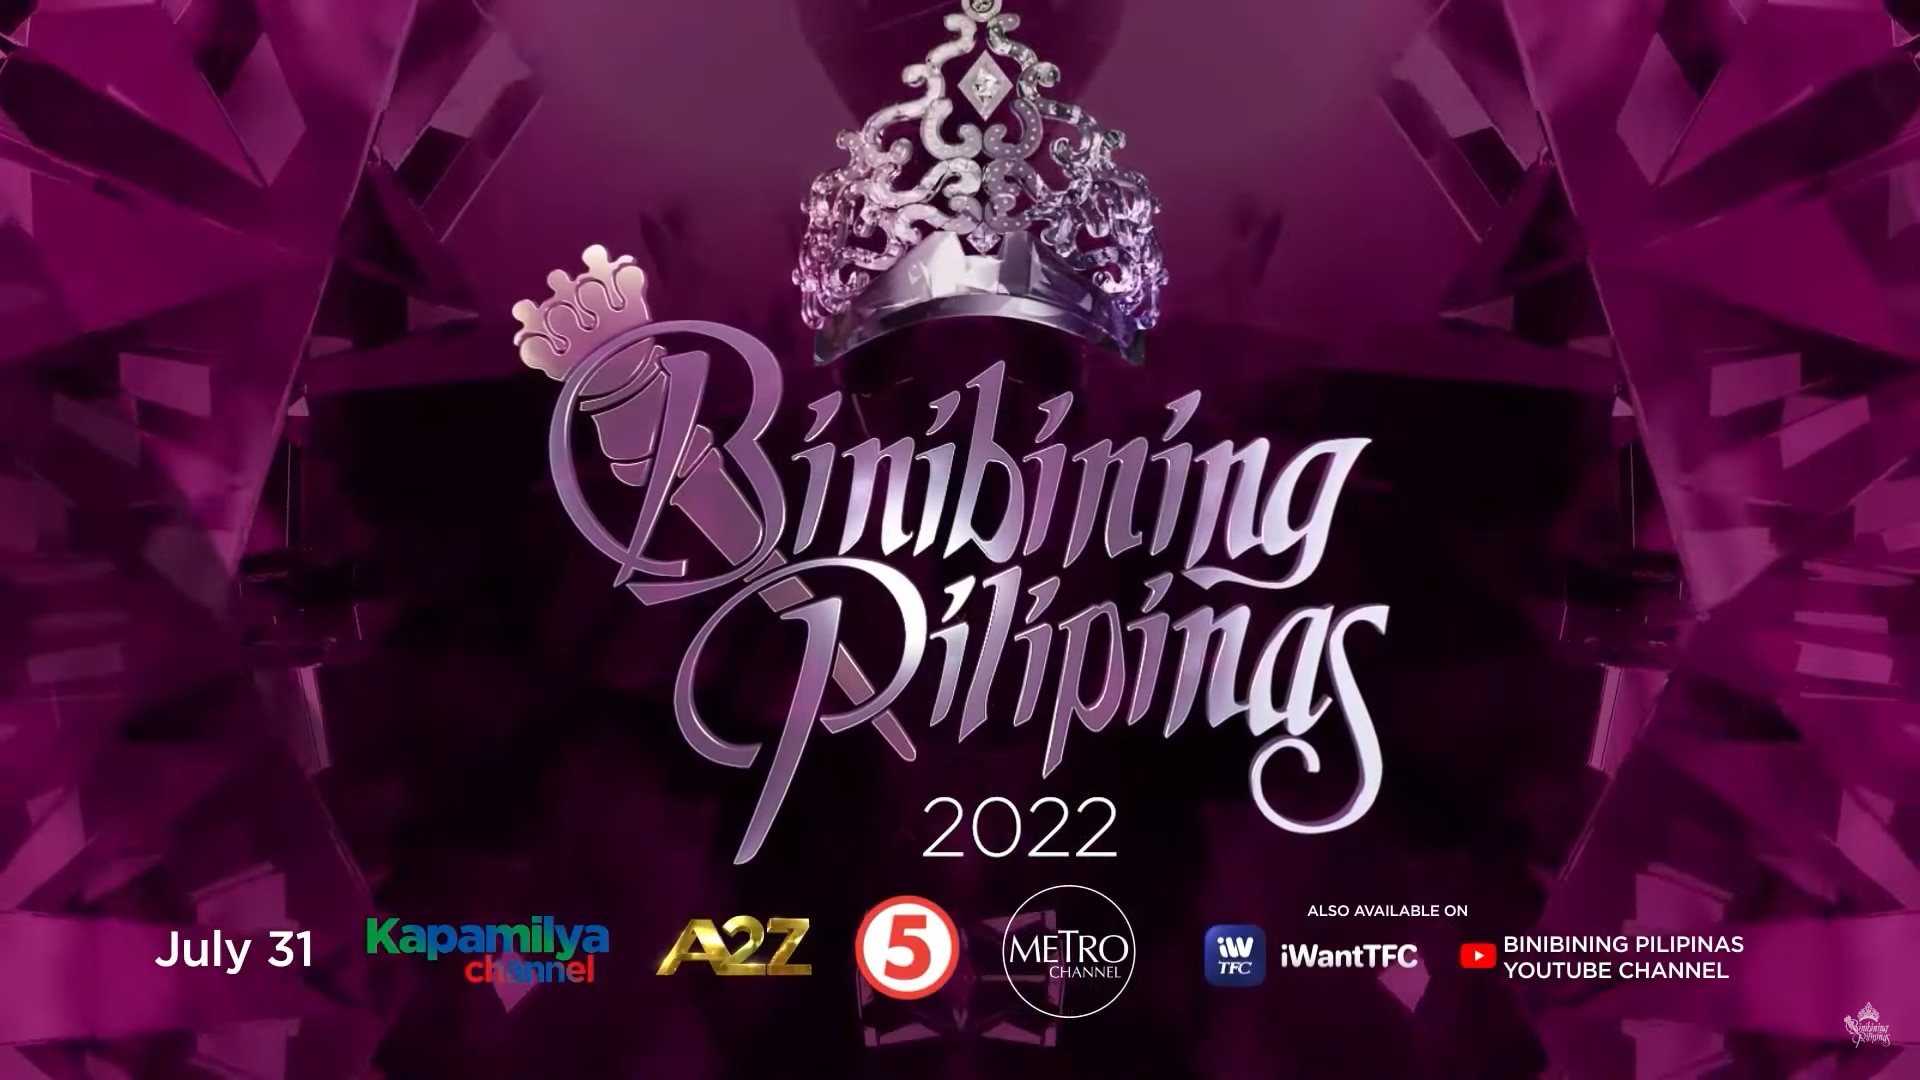 Who will be crowned Bb. Pilipinas 2022 winners?